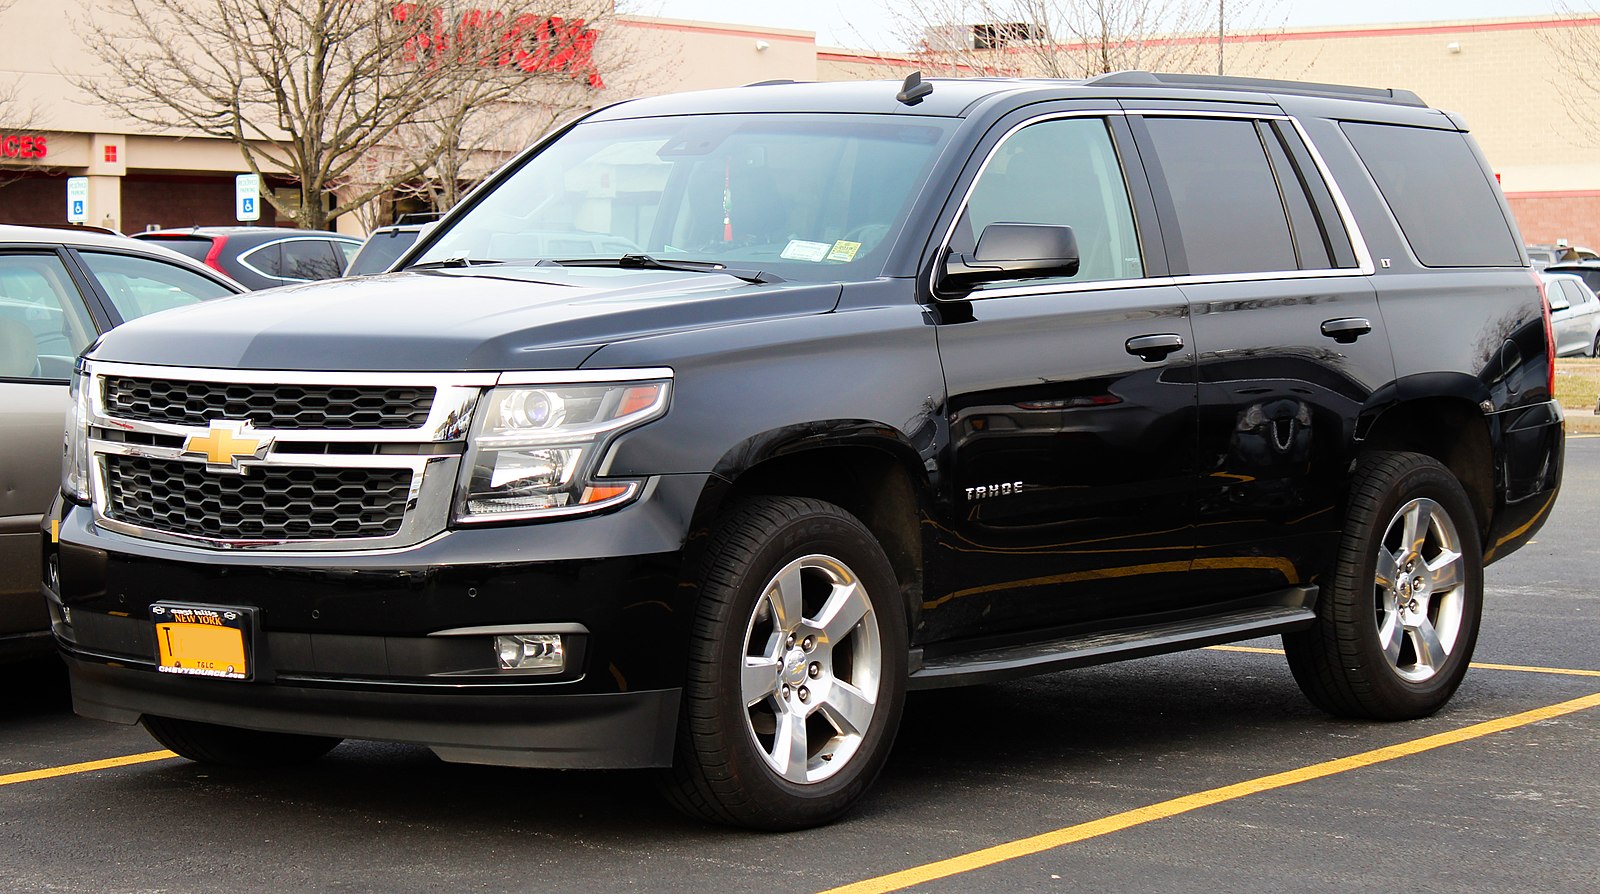 Which Year Models of Used Chevrolet Tahoe to Avoid - CoPilot